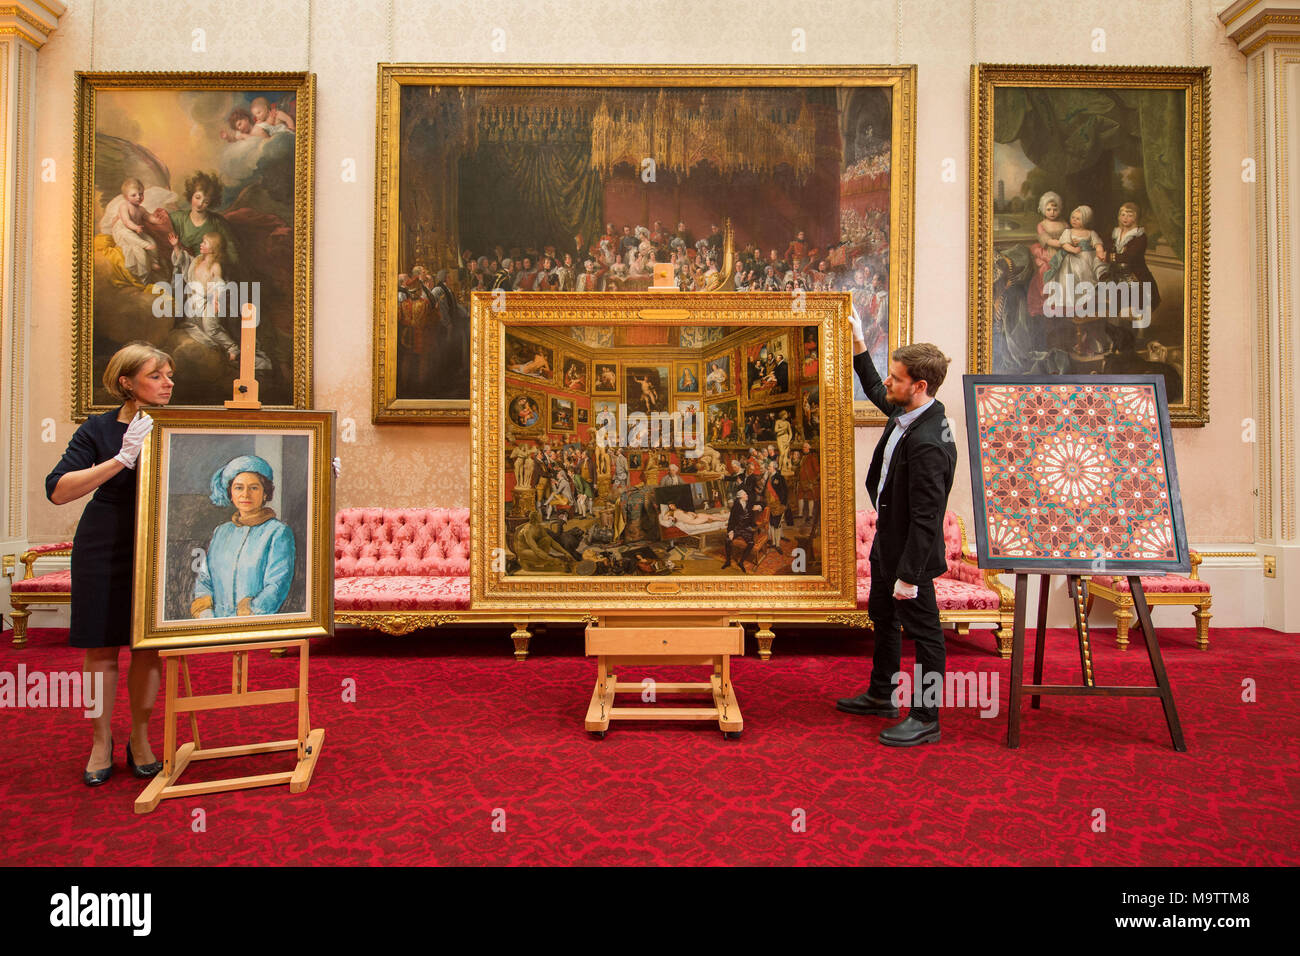 Royal Collection staff adjust (front row, left to right) an oil sketch 'HM the Queen, 1972-73' by Michael Noakes, 'The Tribuna of the Uffizi, 1772-77' and a Moroccan inspired painting by Natasha Mann during the press preview of the Prince and Patron exhibition at Buckingham Palace, London, which will mark the 70th birthday of the Prince of Wales this year. Stock Photo